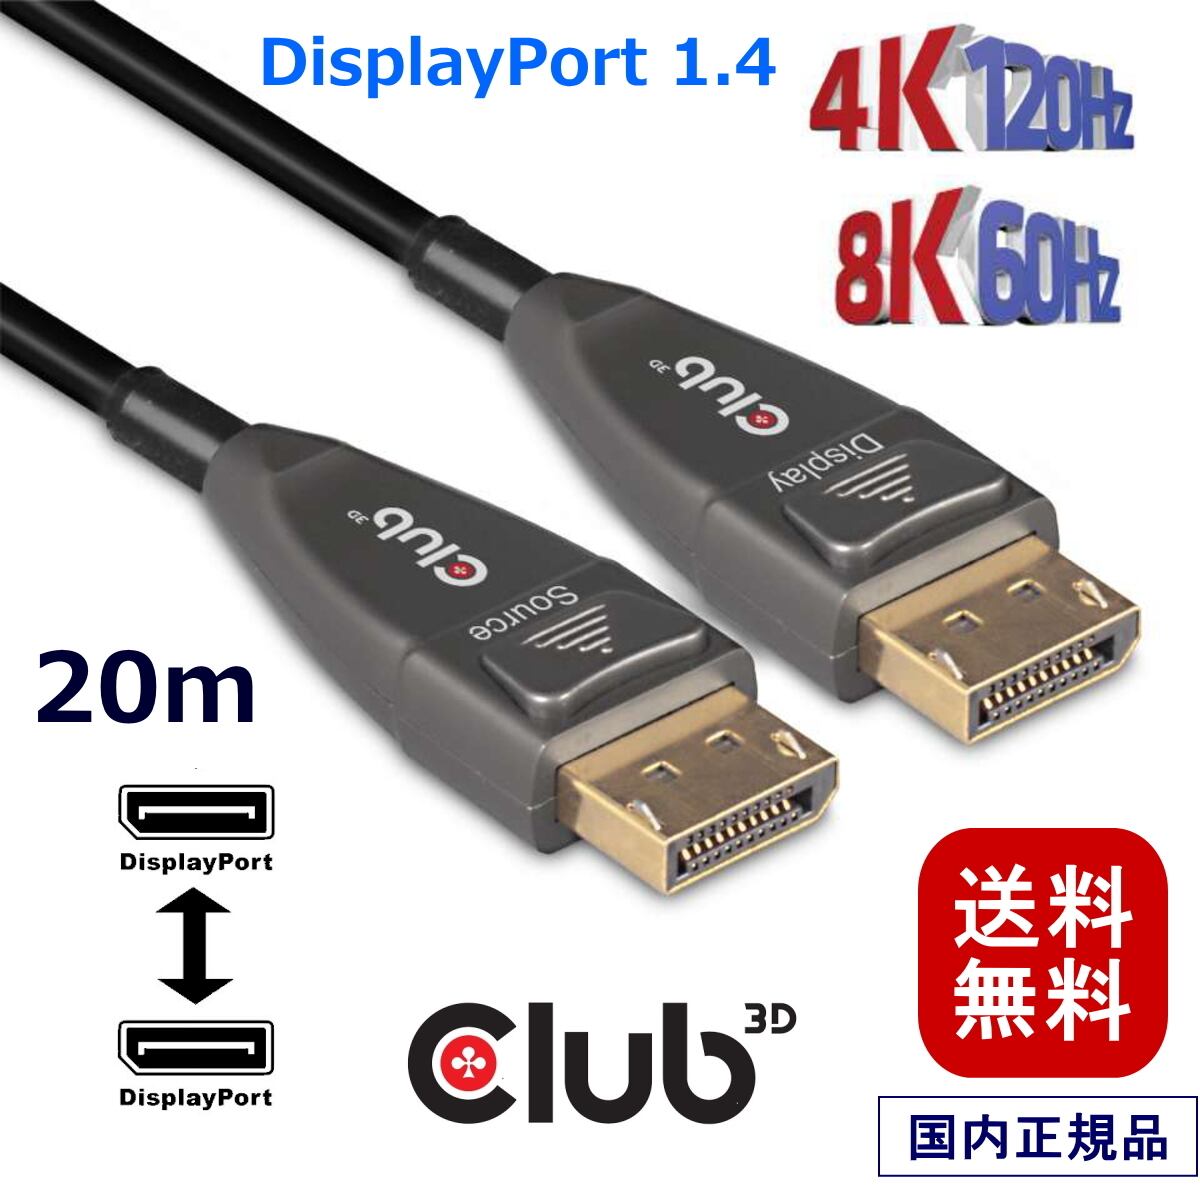 CAC-1079】Club 3D DisplayPort 1.4 アクティブ 光ケーブル Active Optical Cable 単方向  4K120Hz 8K60Hz オス/オス 20m (CAC-1079) BearHouse